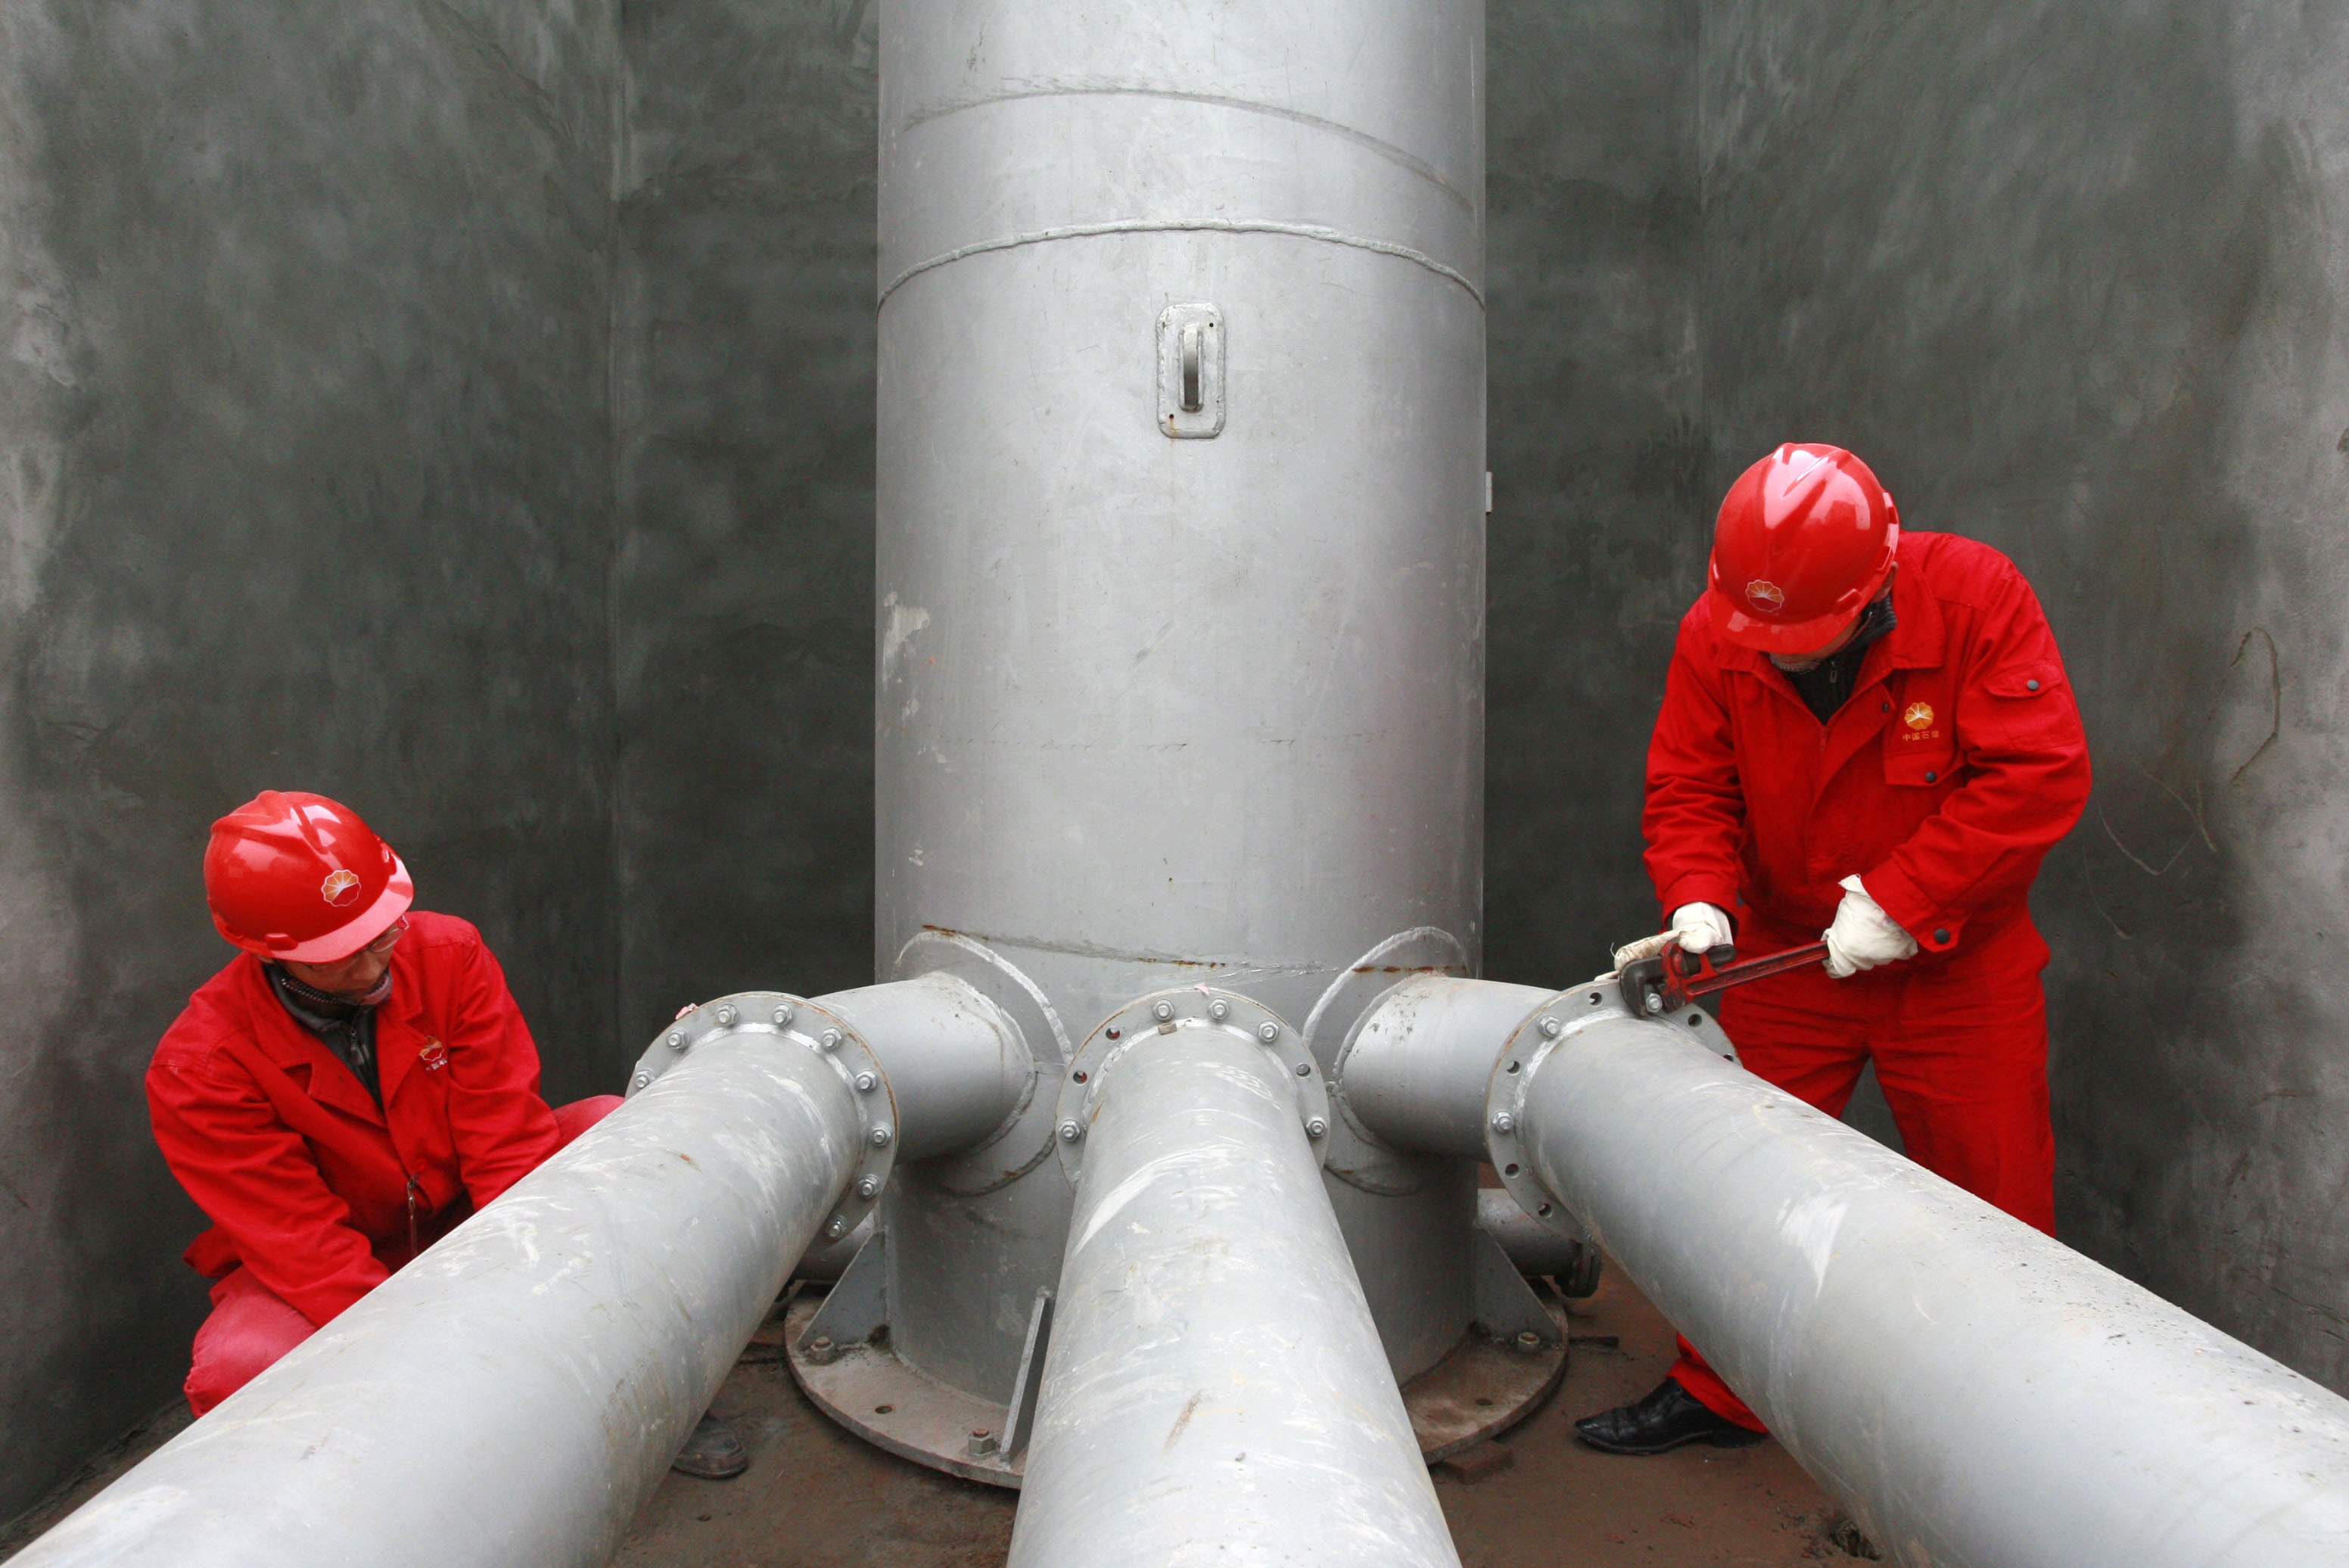 Labourers work at a PetroChina refinery in Suining in Sichuan. Photo: Reuters